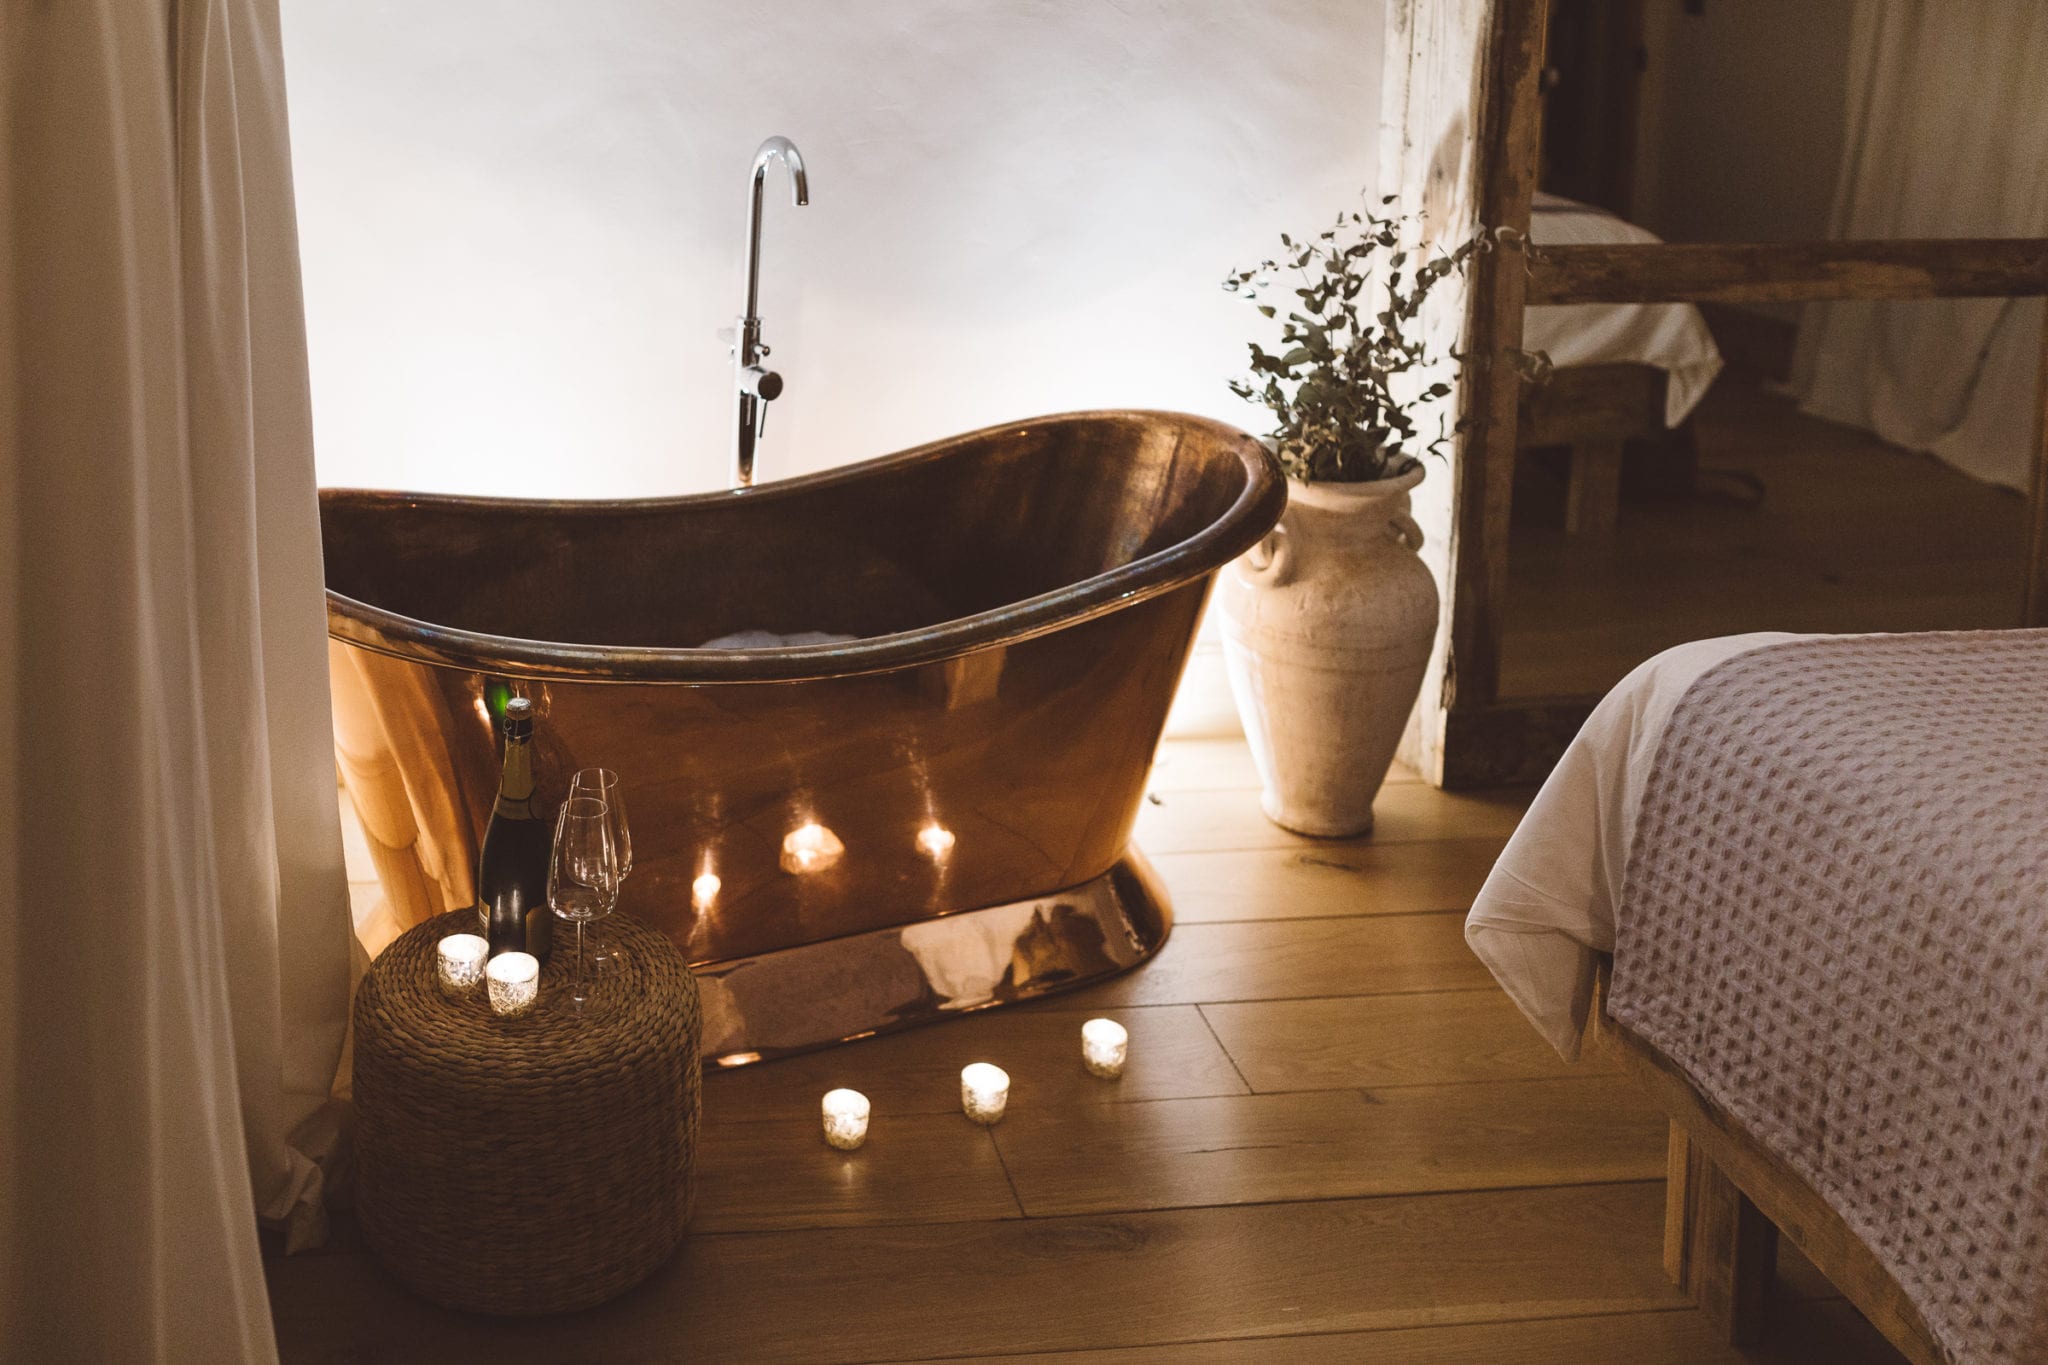 A copper roll top bath tub surrounded by candles